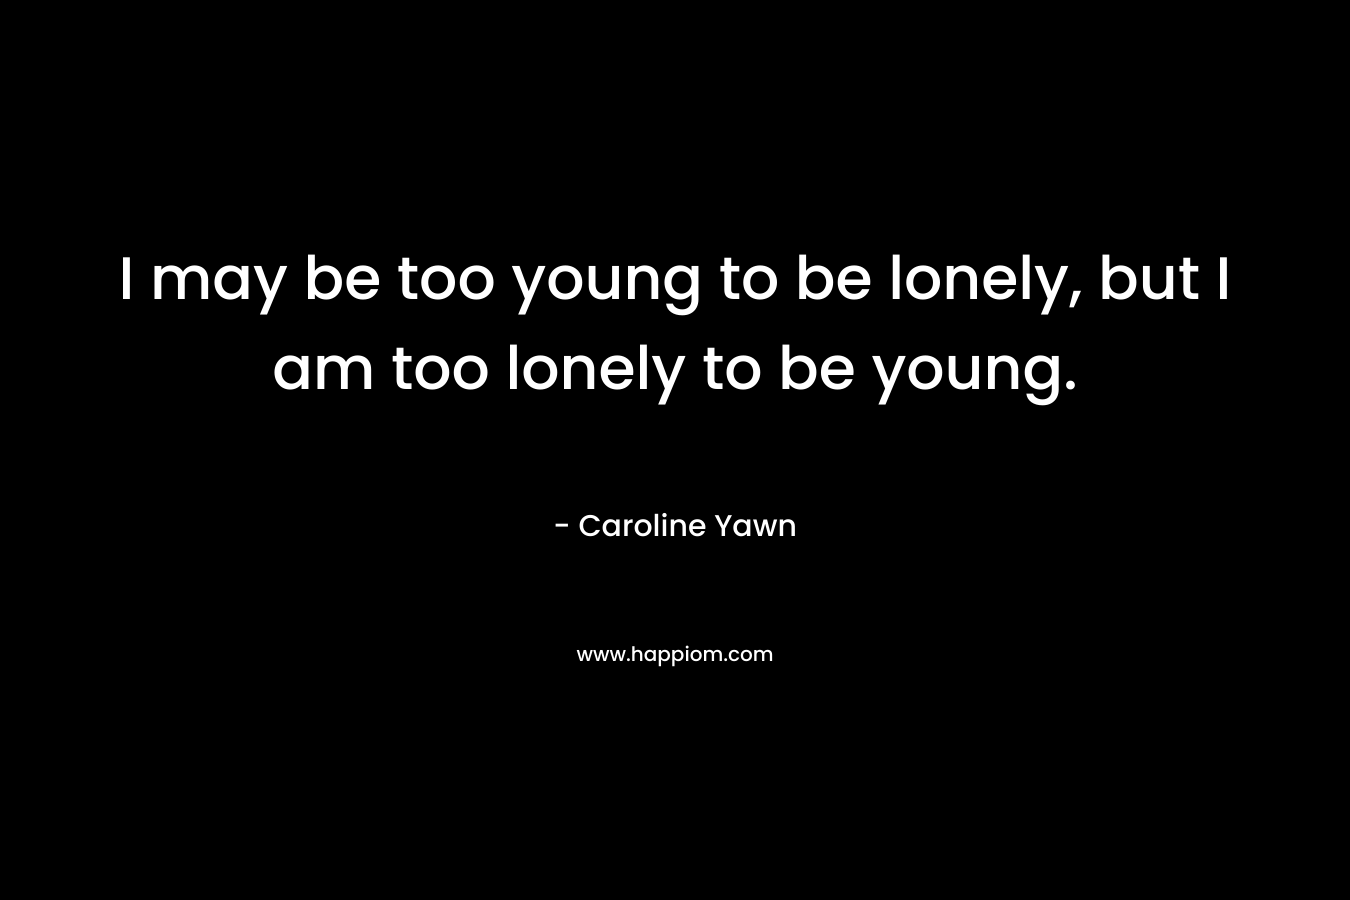 I may be too young to be lonely, but I am too lonely to be young.